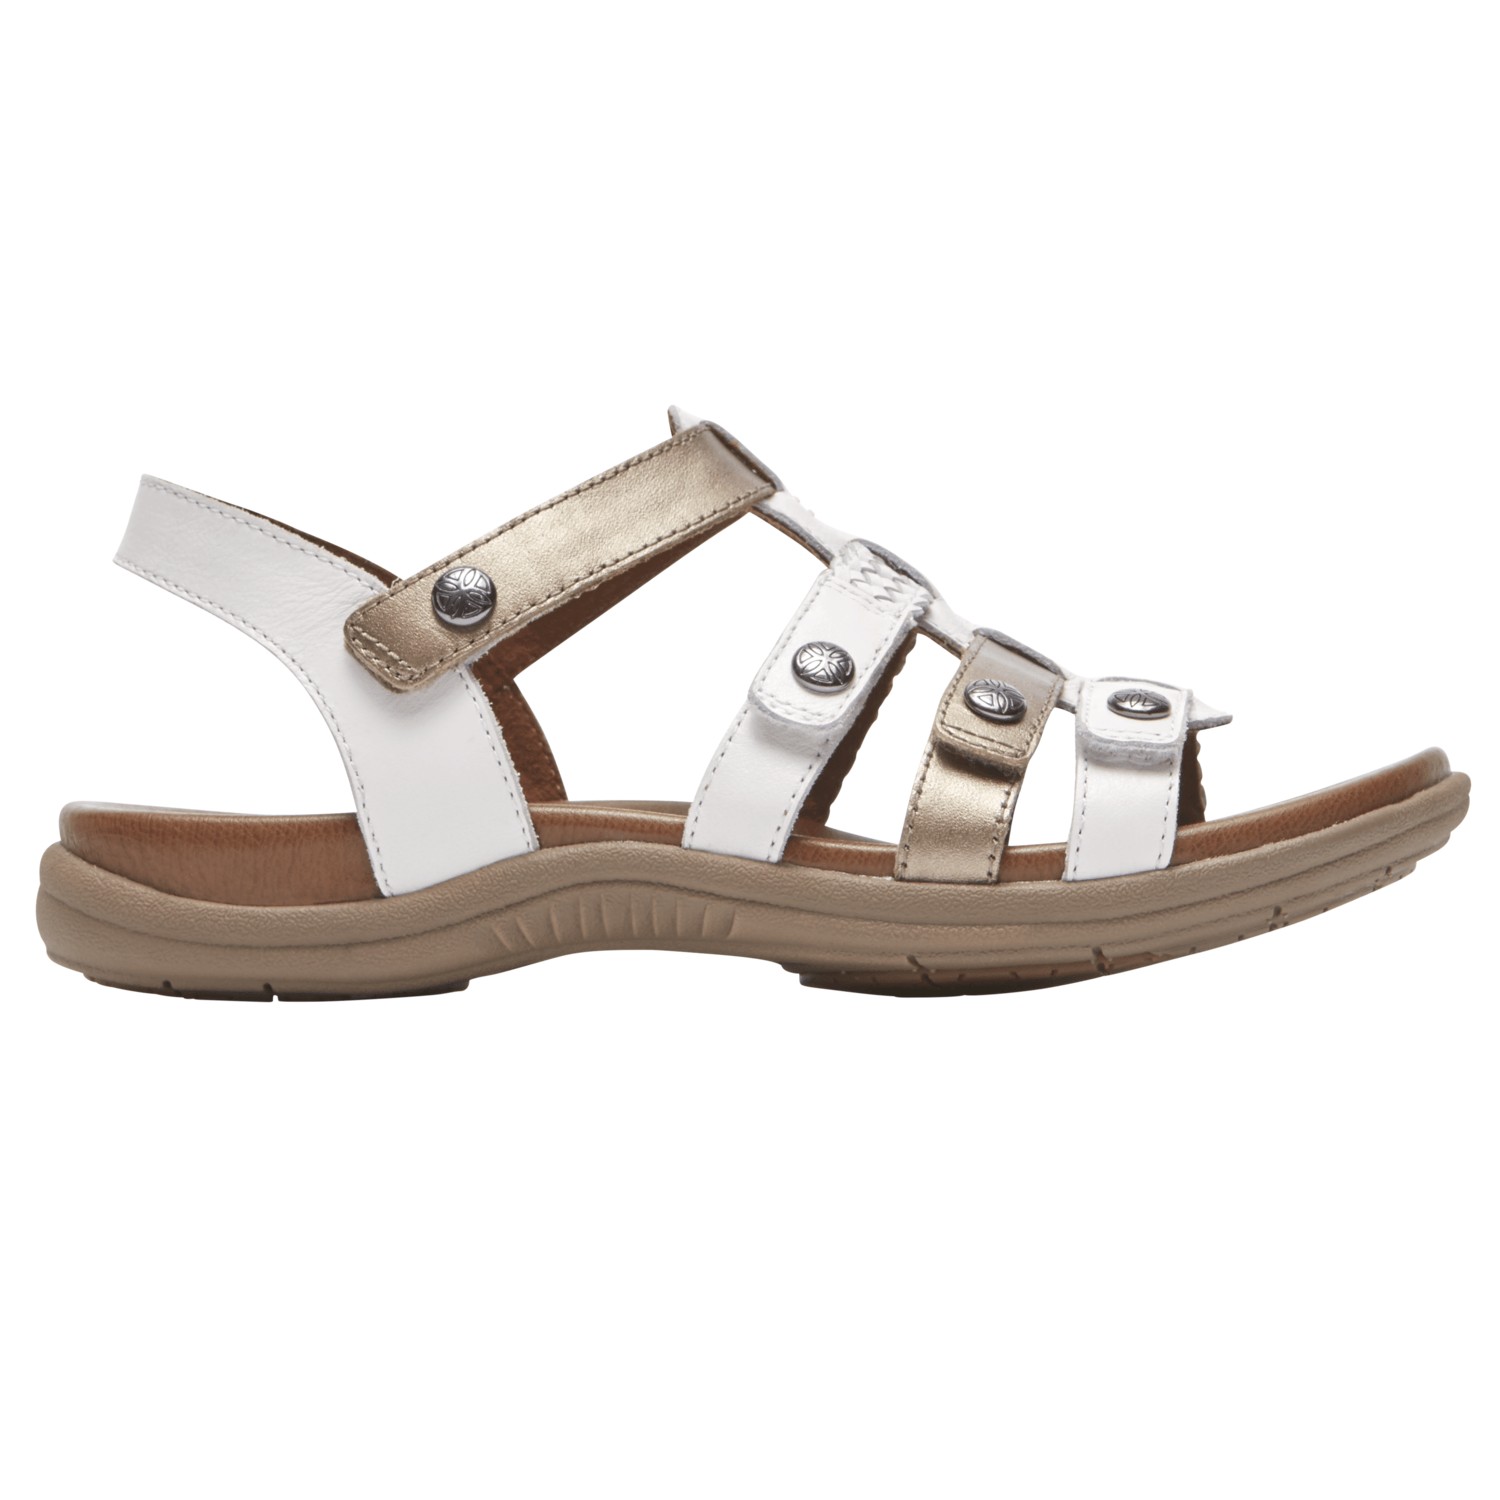 Rockport Cobb Hill Rubey T Strap Womens Sandal White Multi 8 Medium Rockport Cobb Hill Collection RP-839